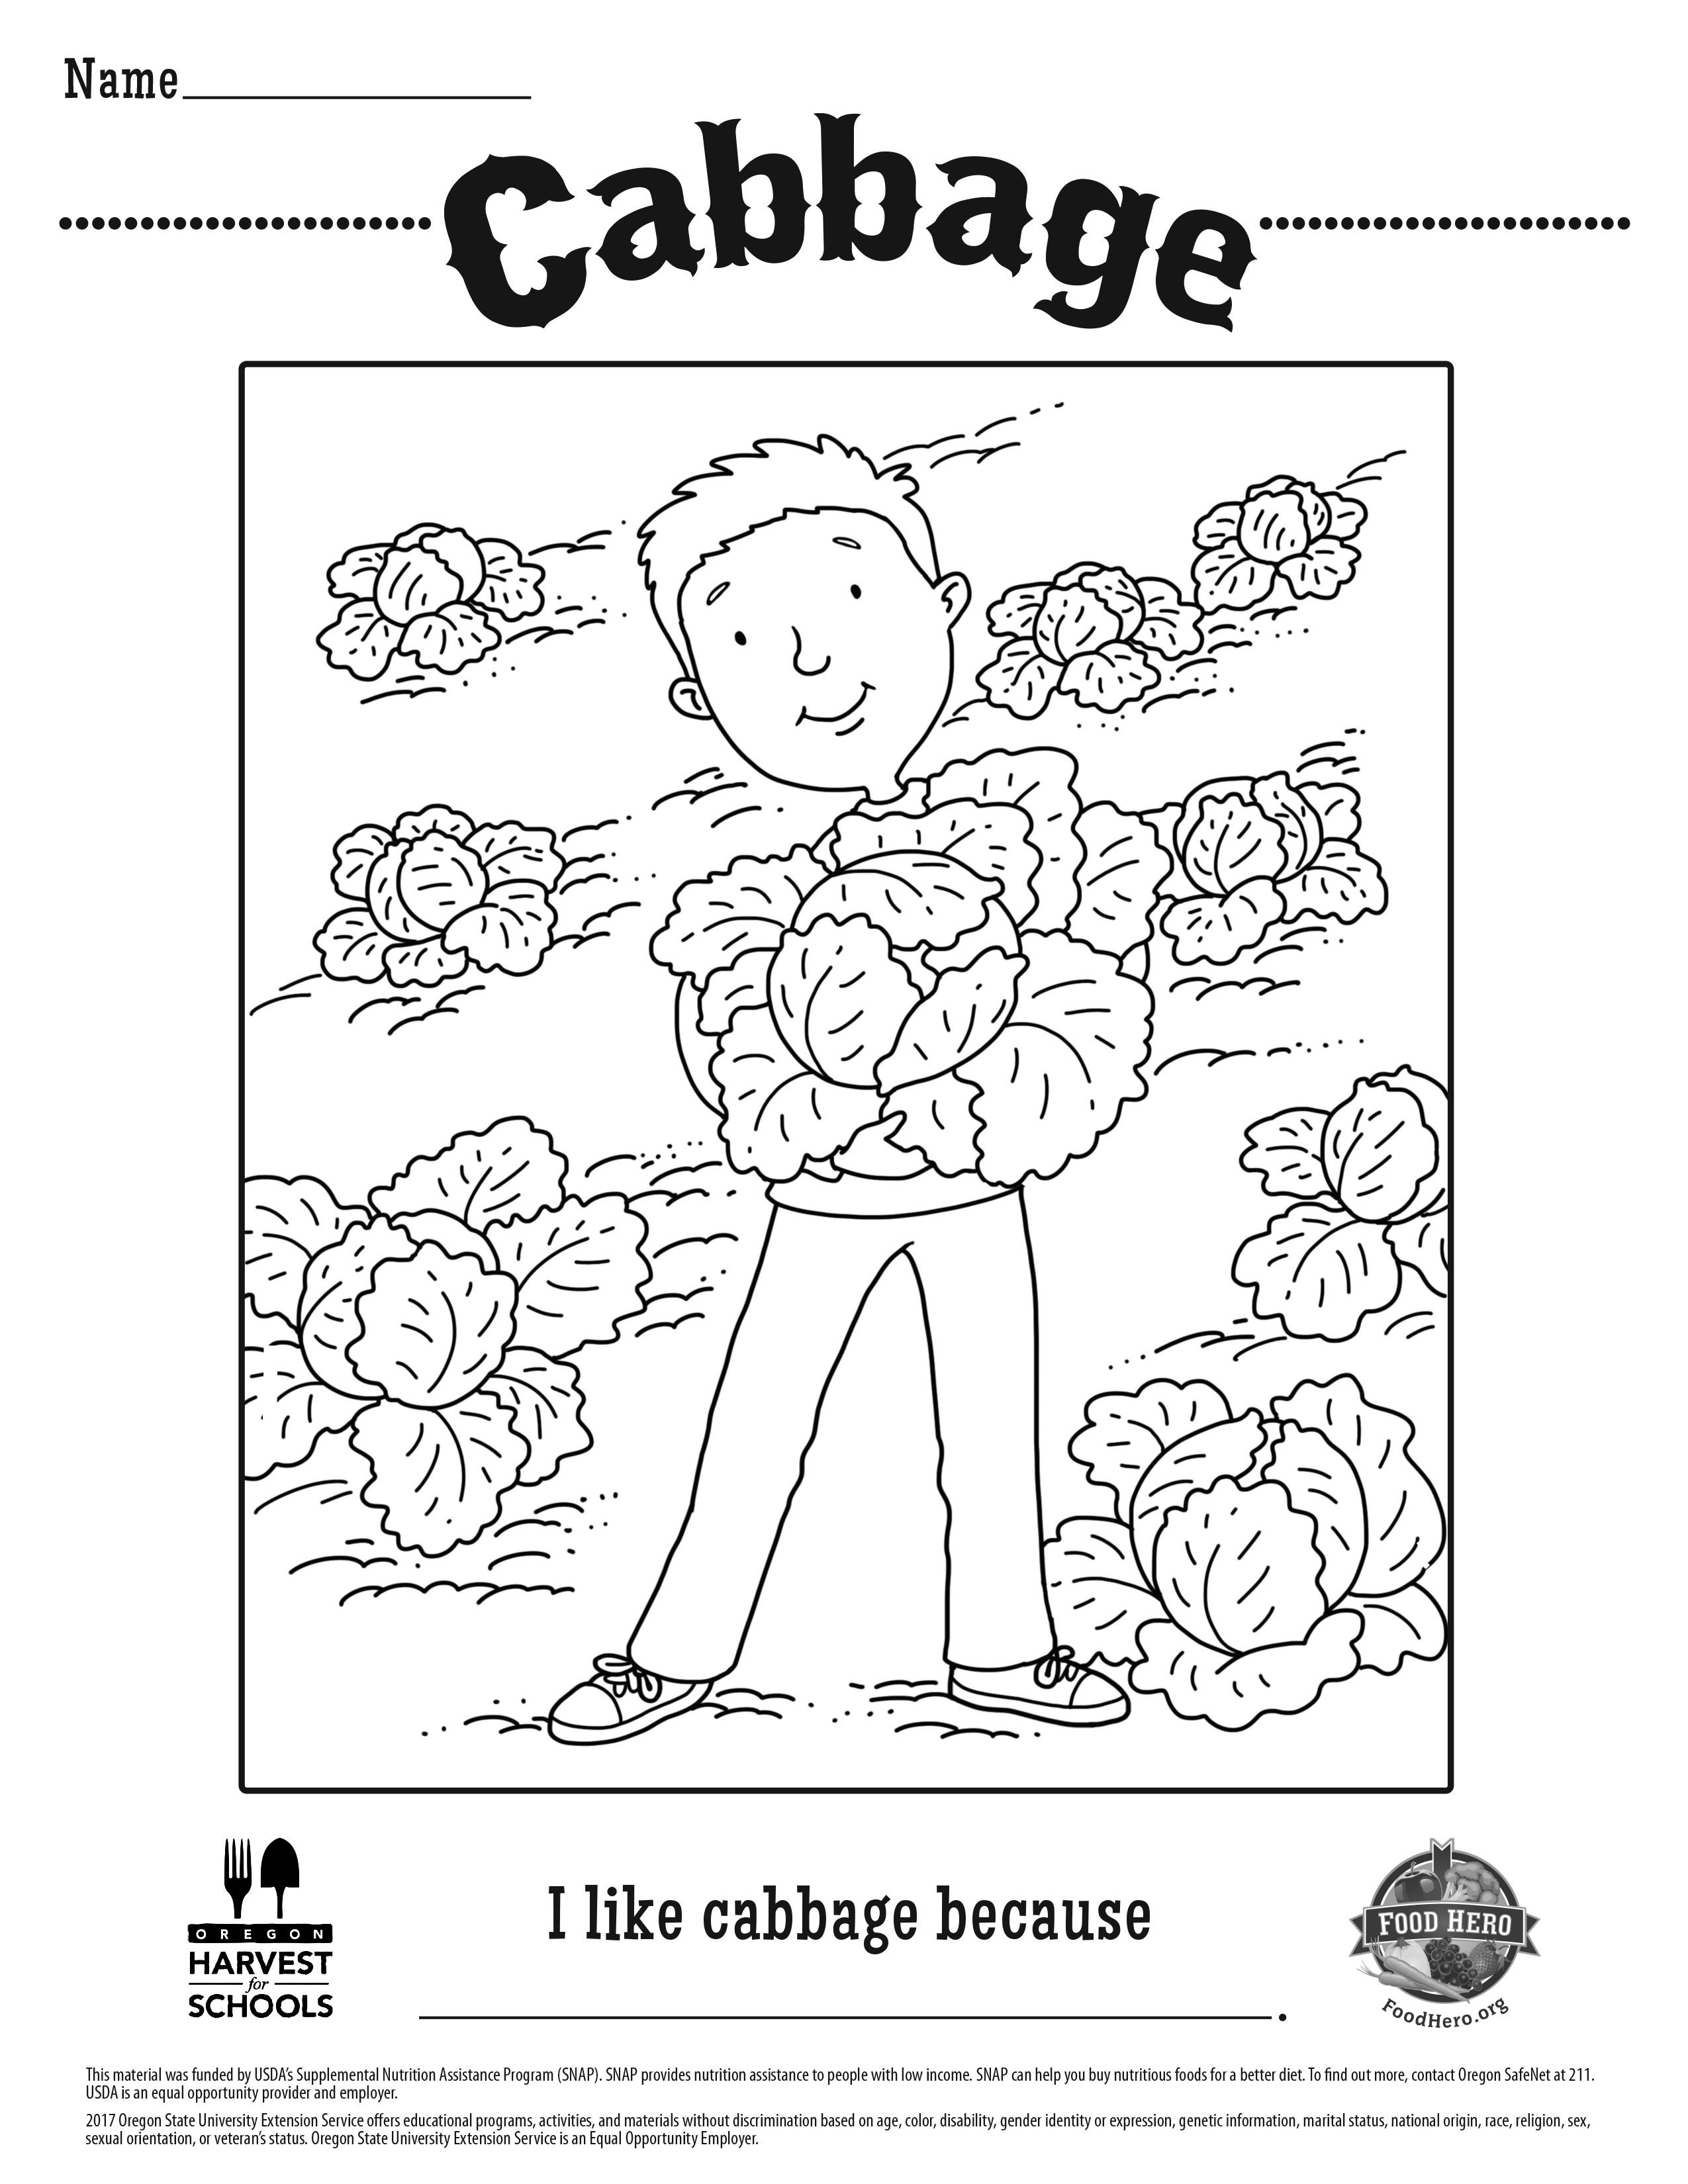 Cabbage Coloring Sheet 